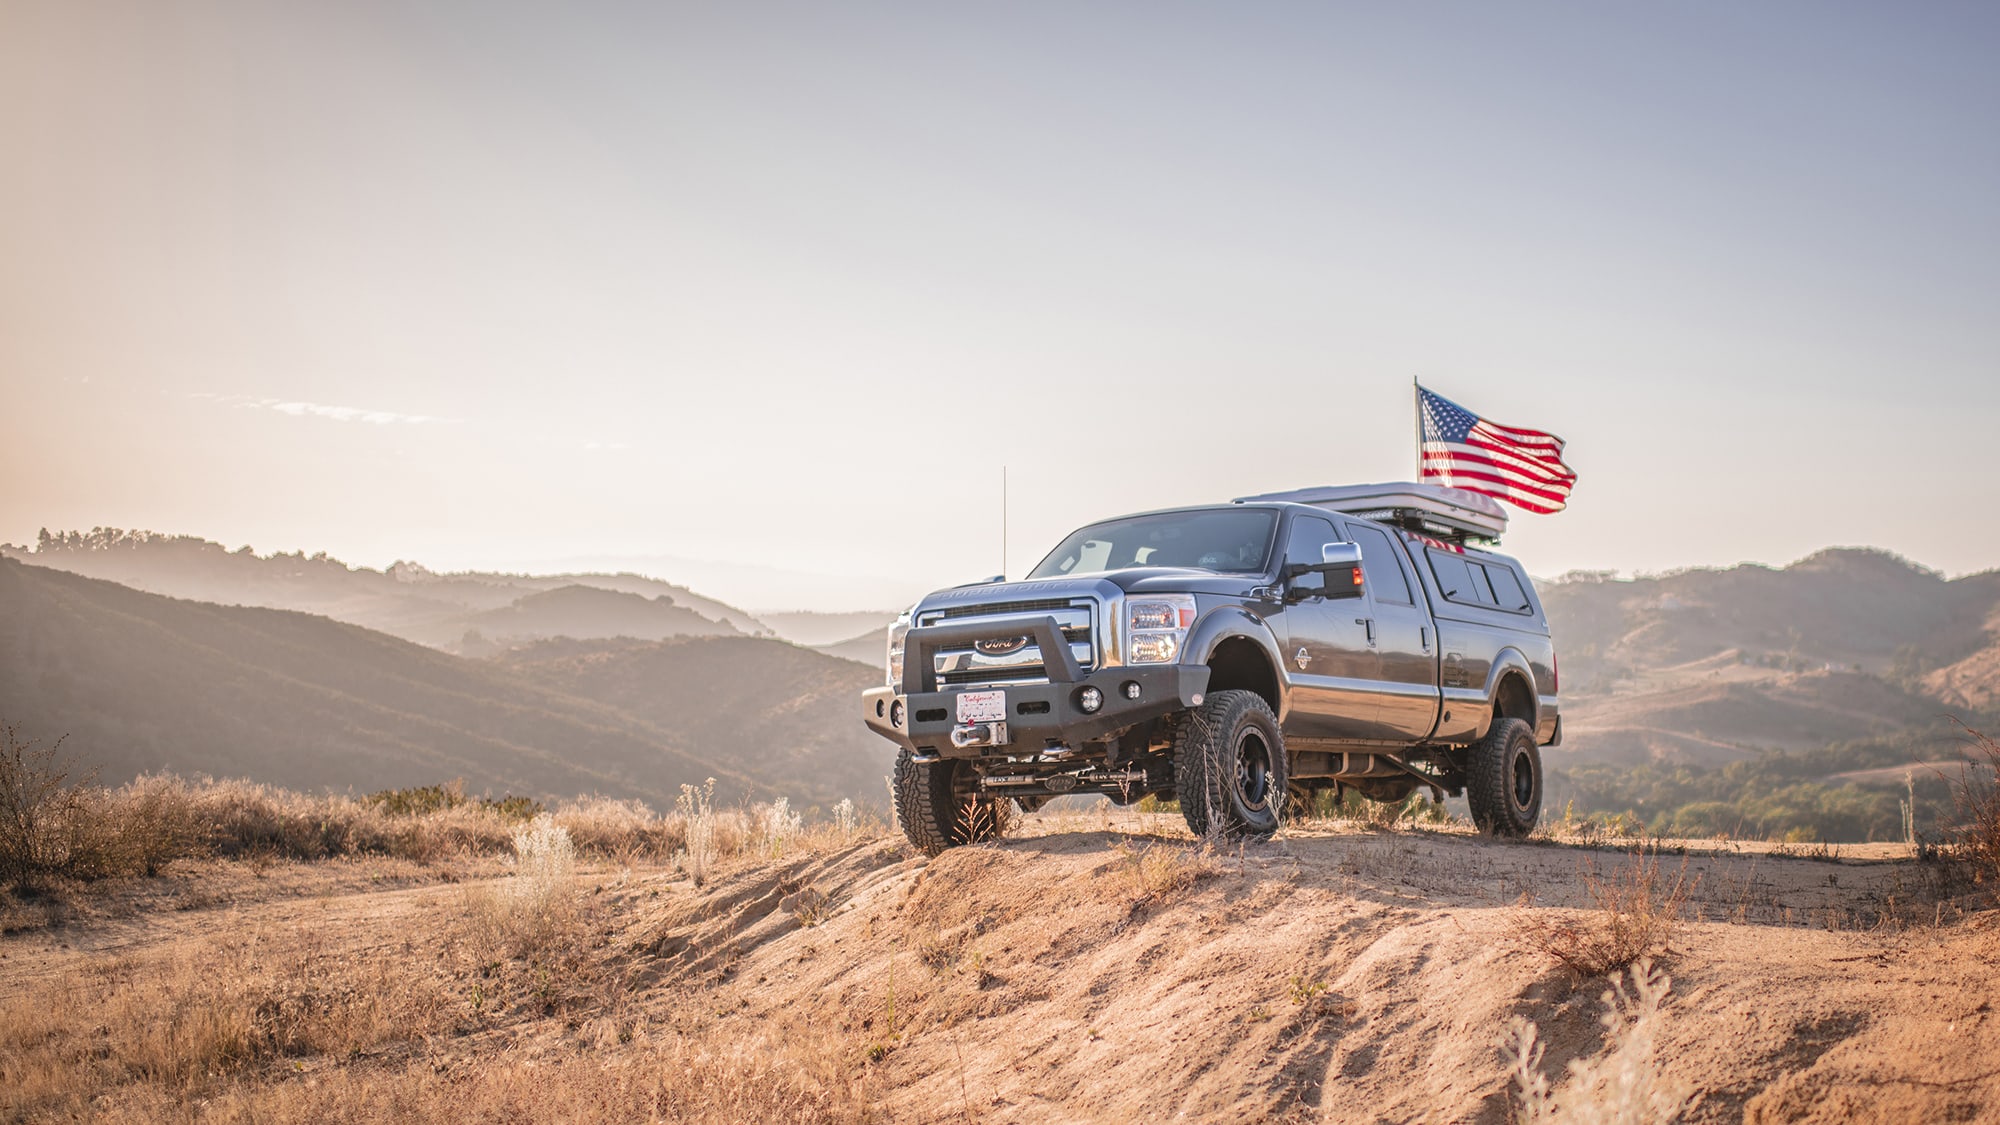 Powerstroke with Goodyear Ultra Terrain Tires and American flag